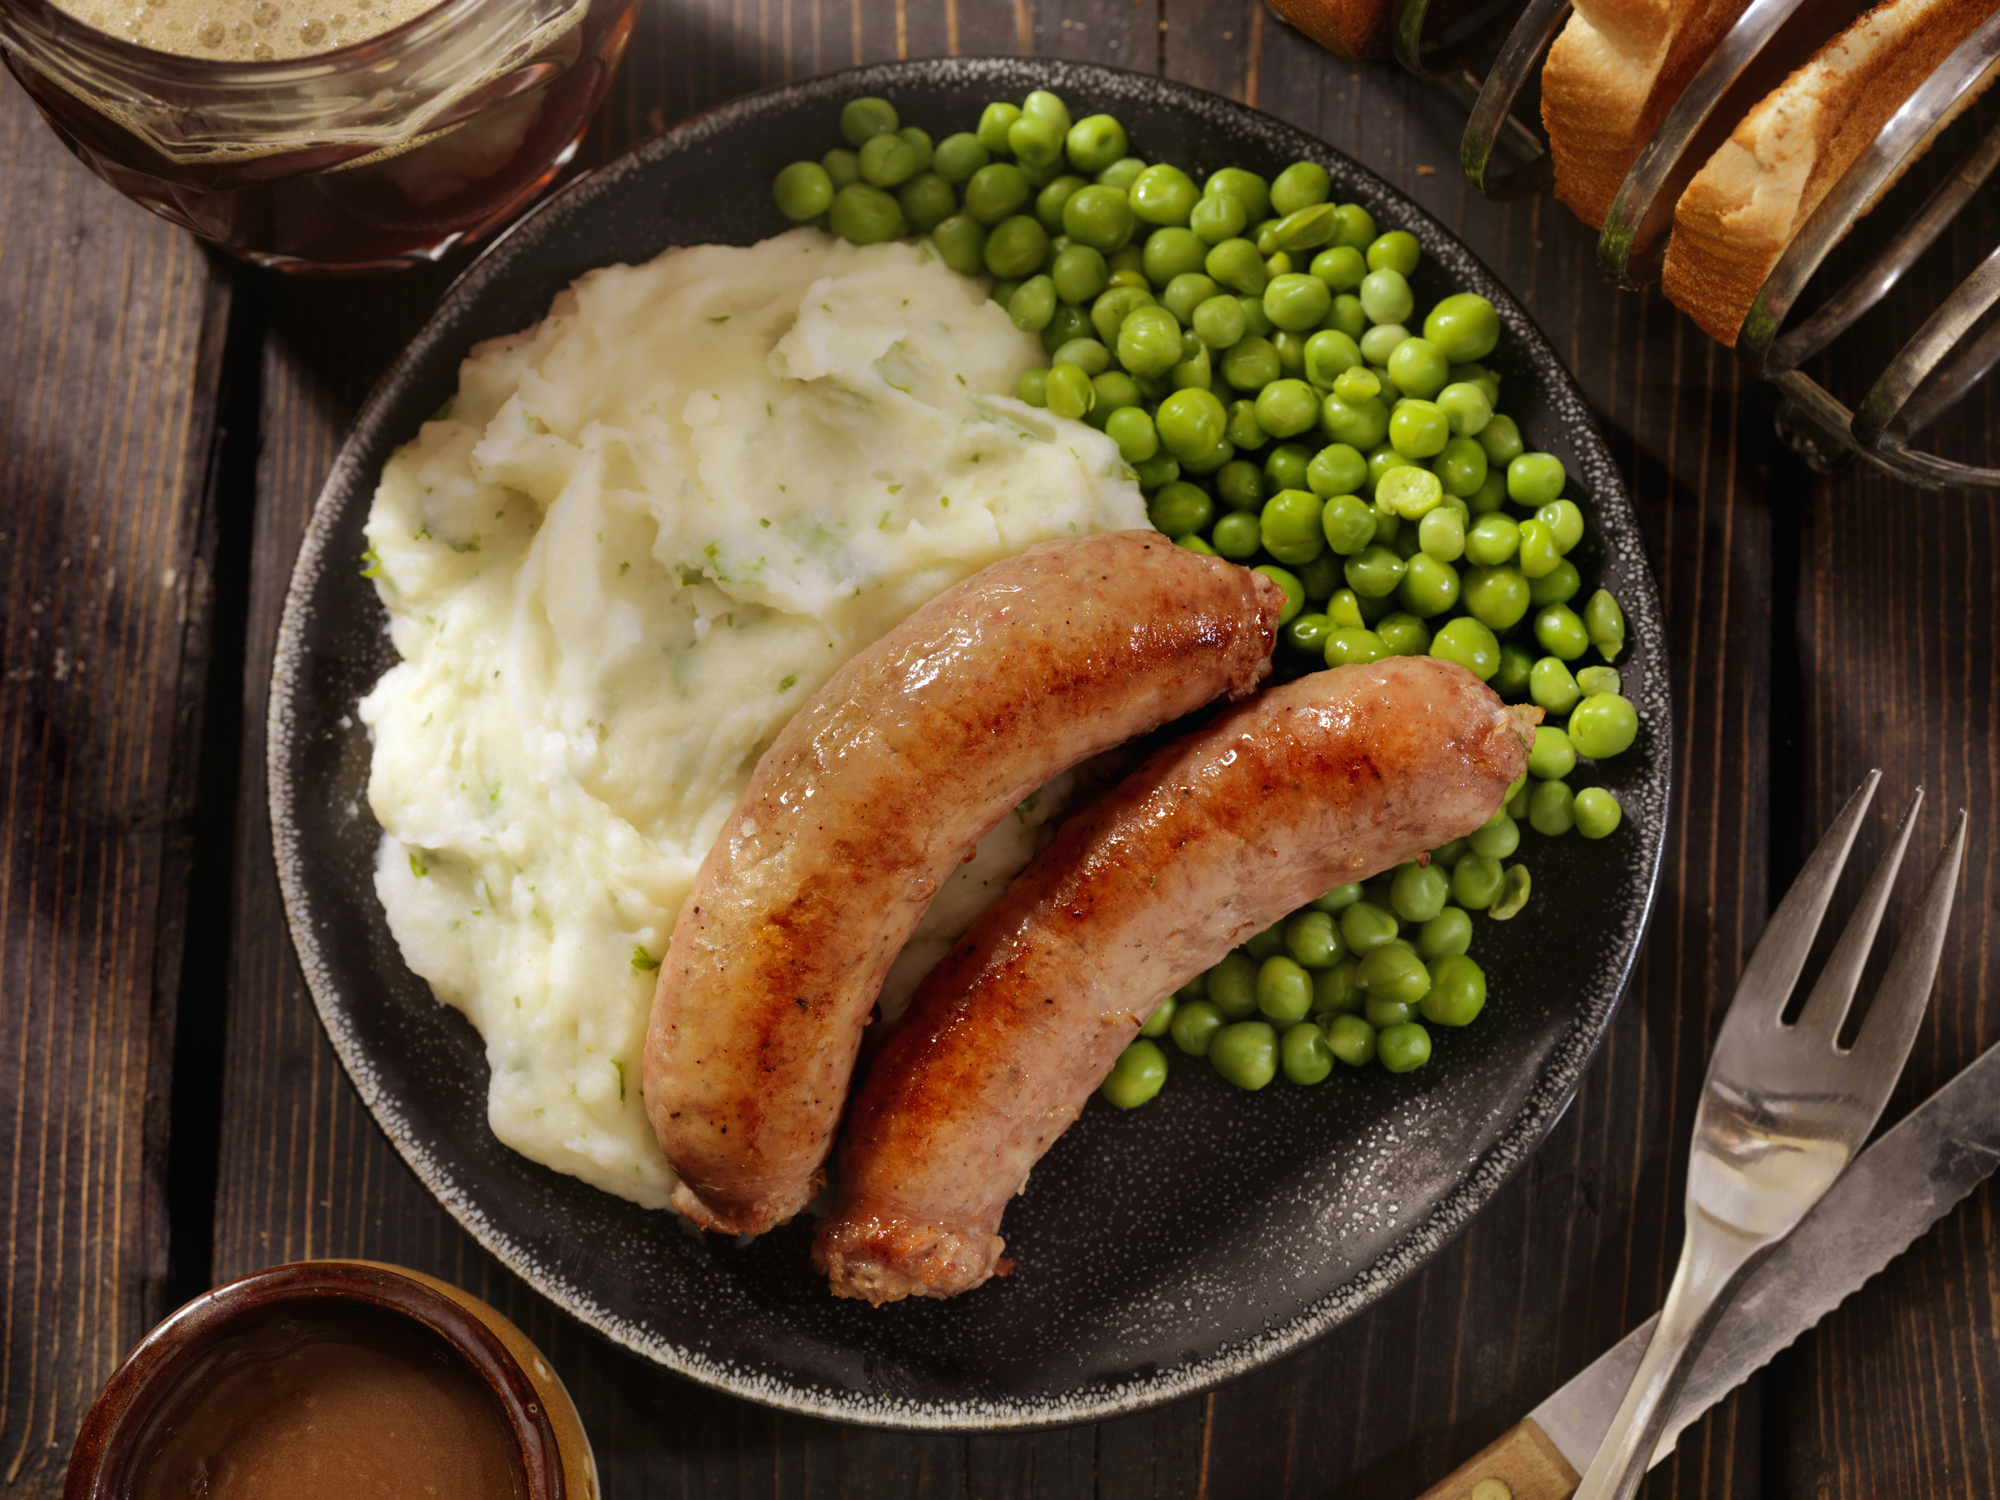 Mashed Potato with sausages and Peas